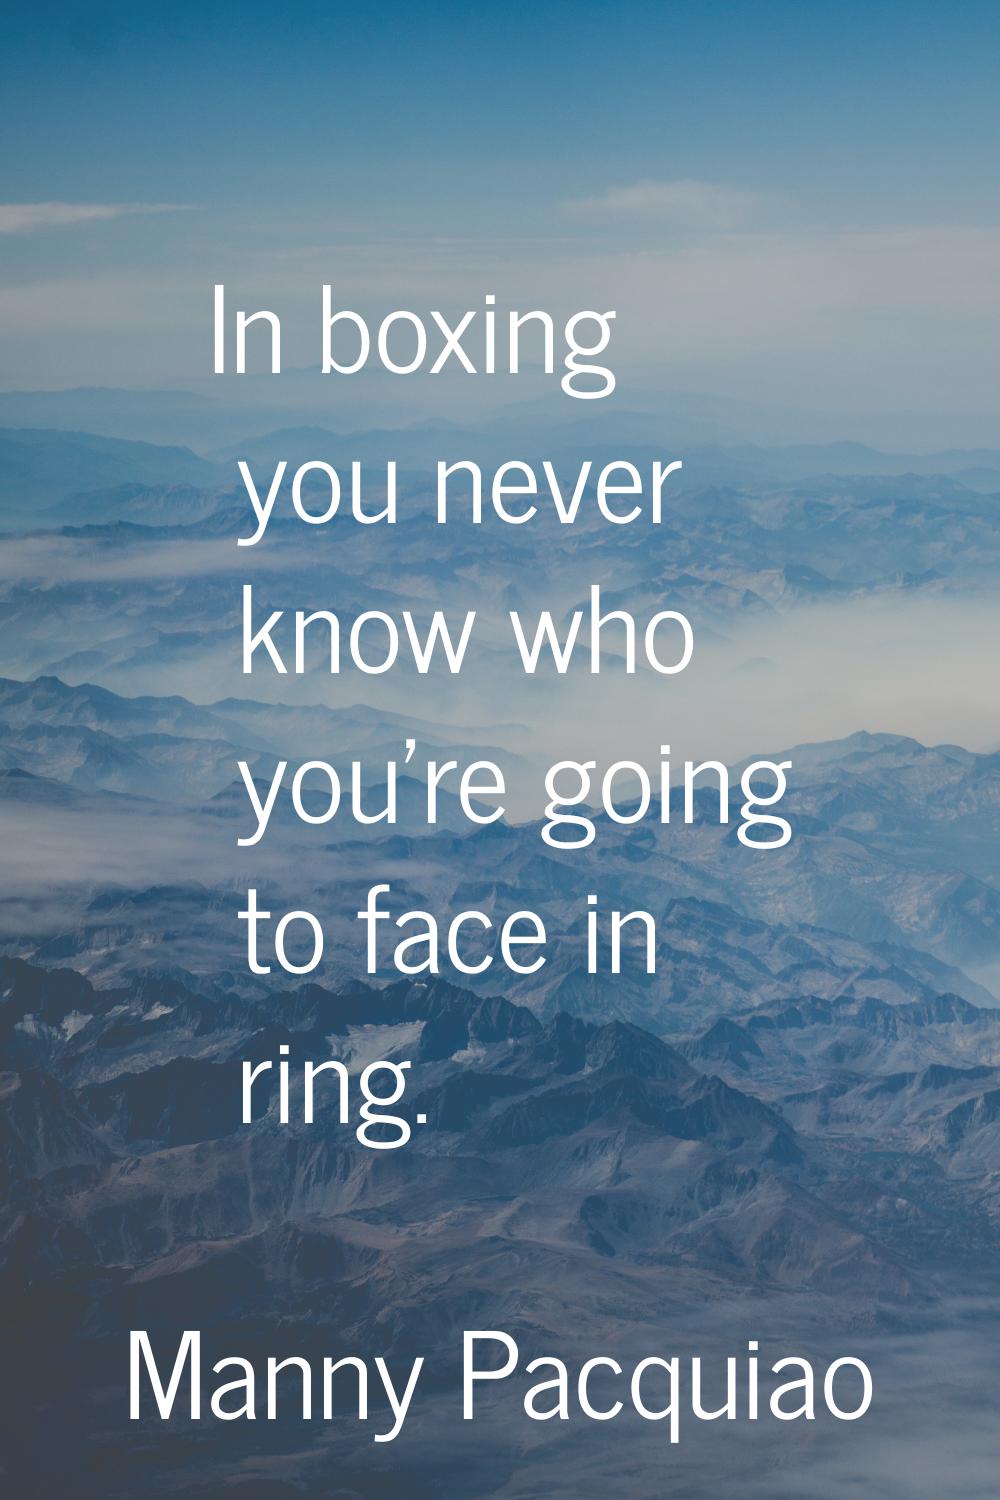 In boxing you never know who you're going to face in ring.